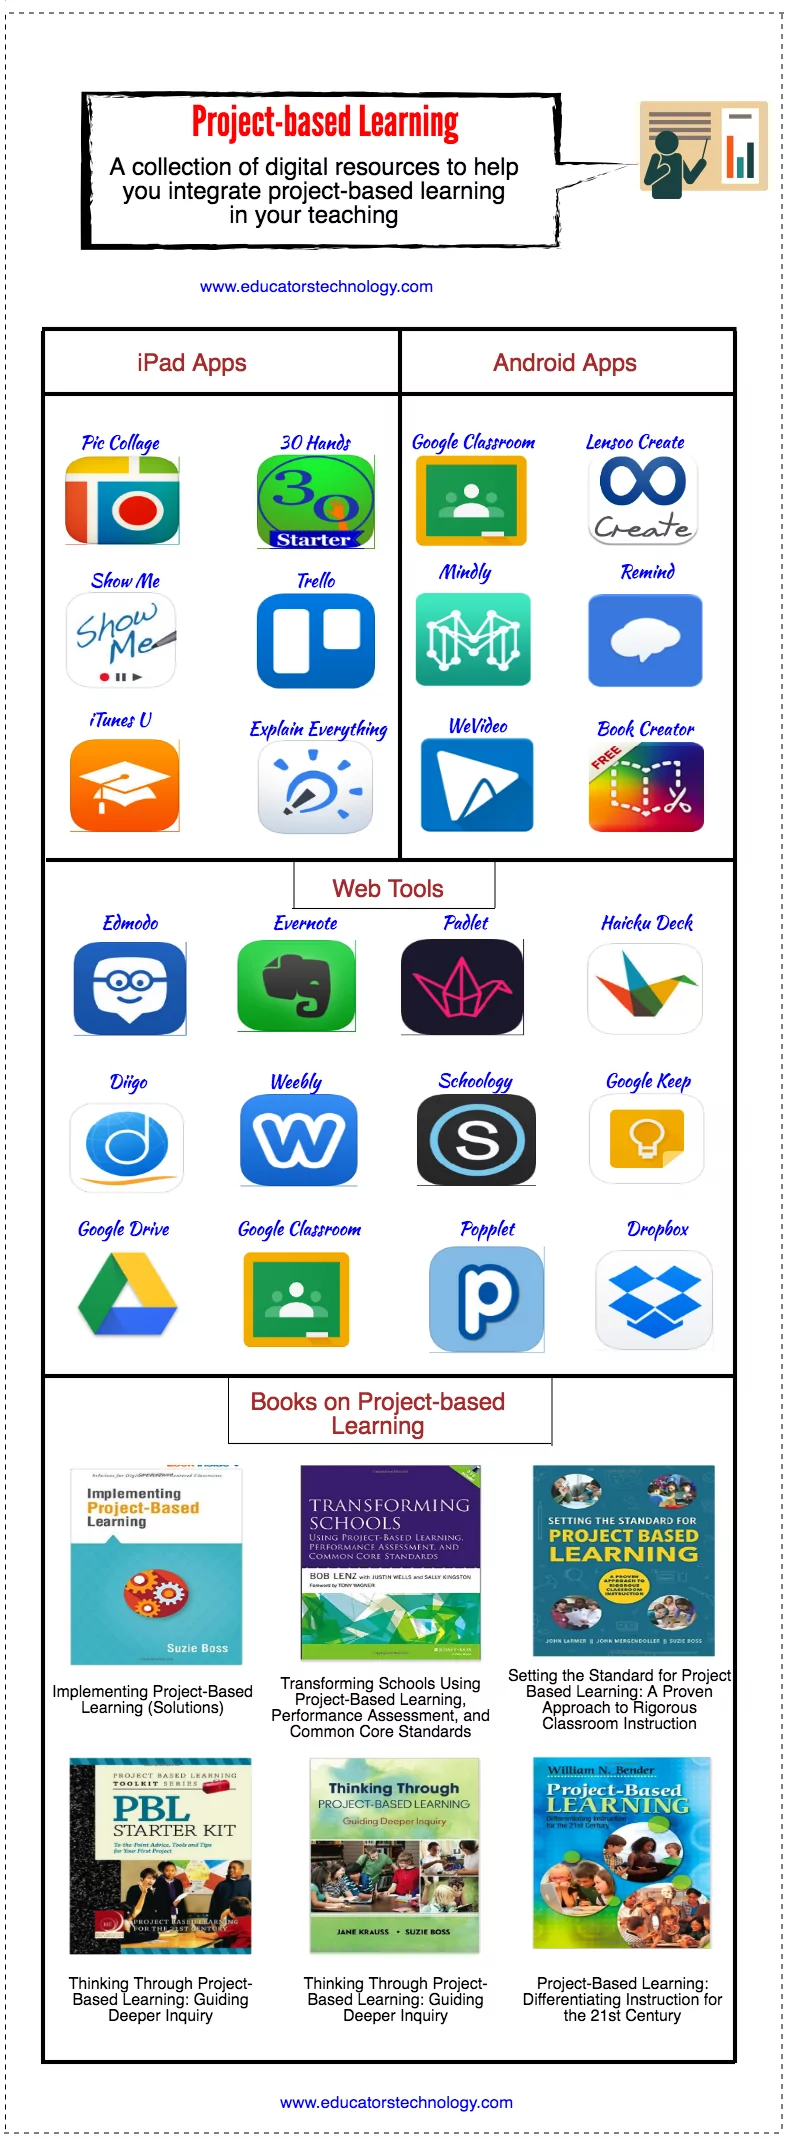 Project-based Learning Guide for Teachers